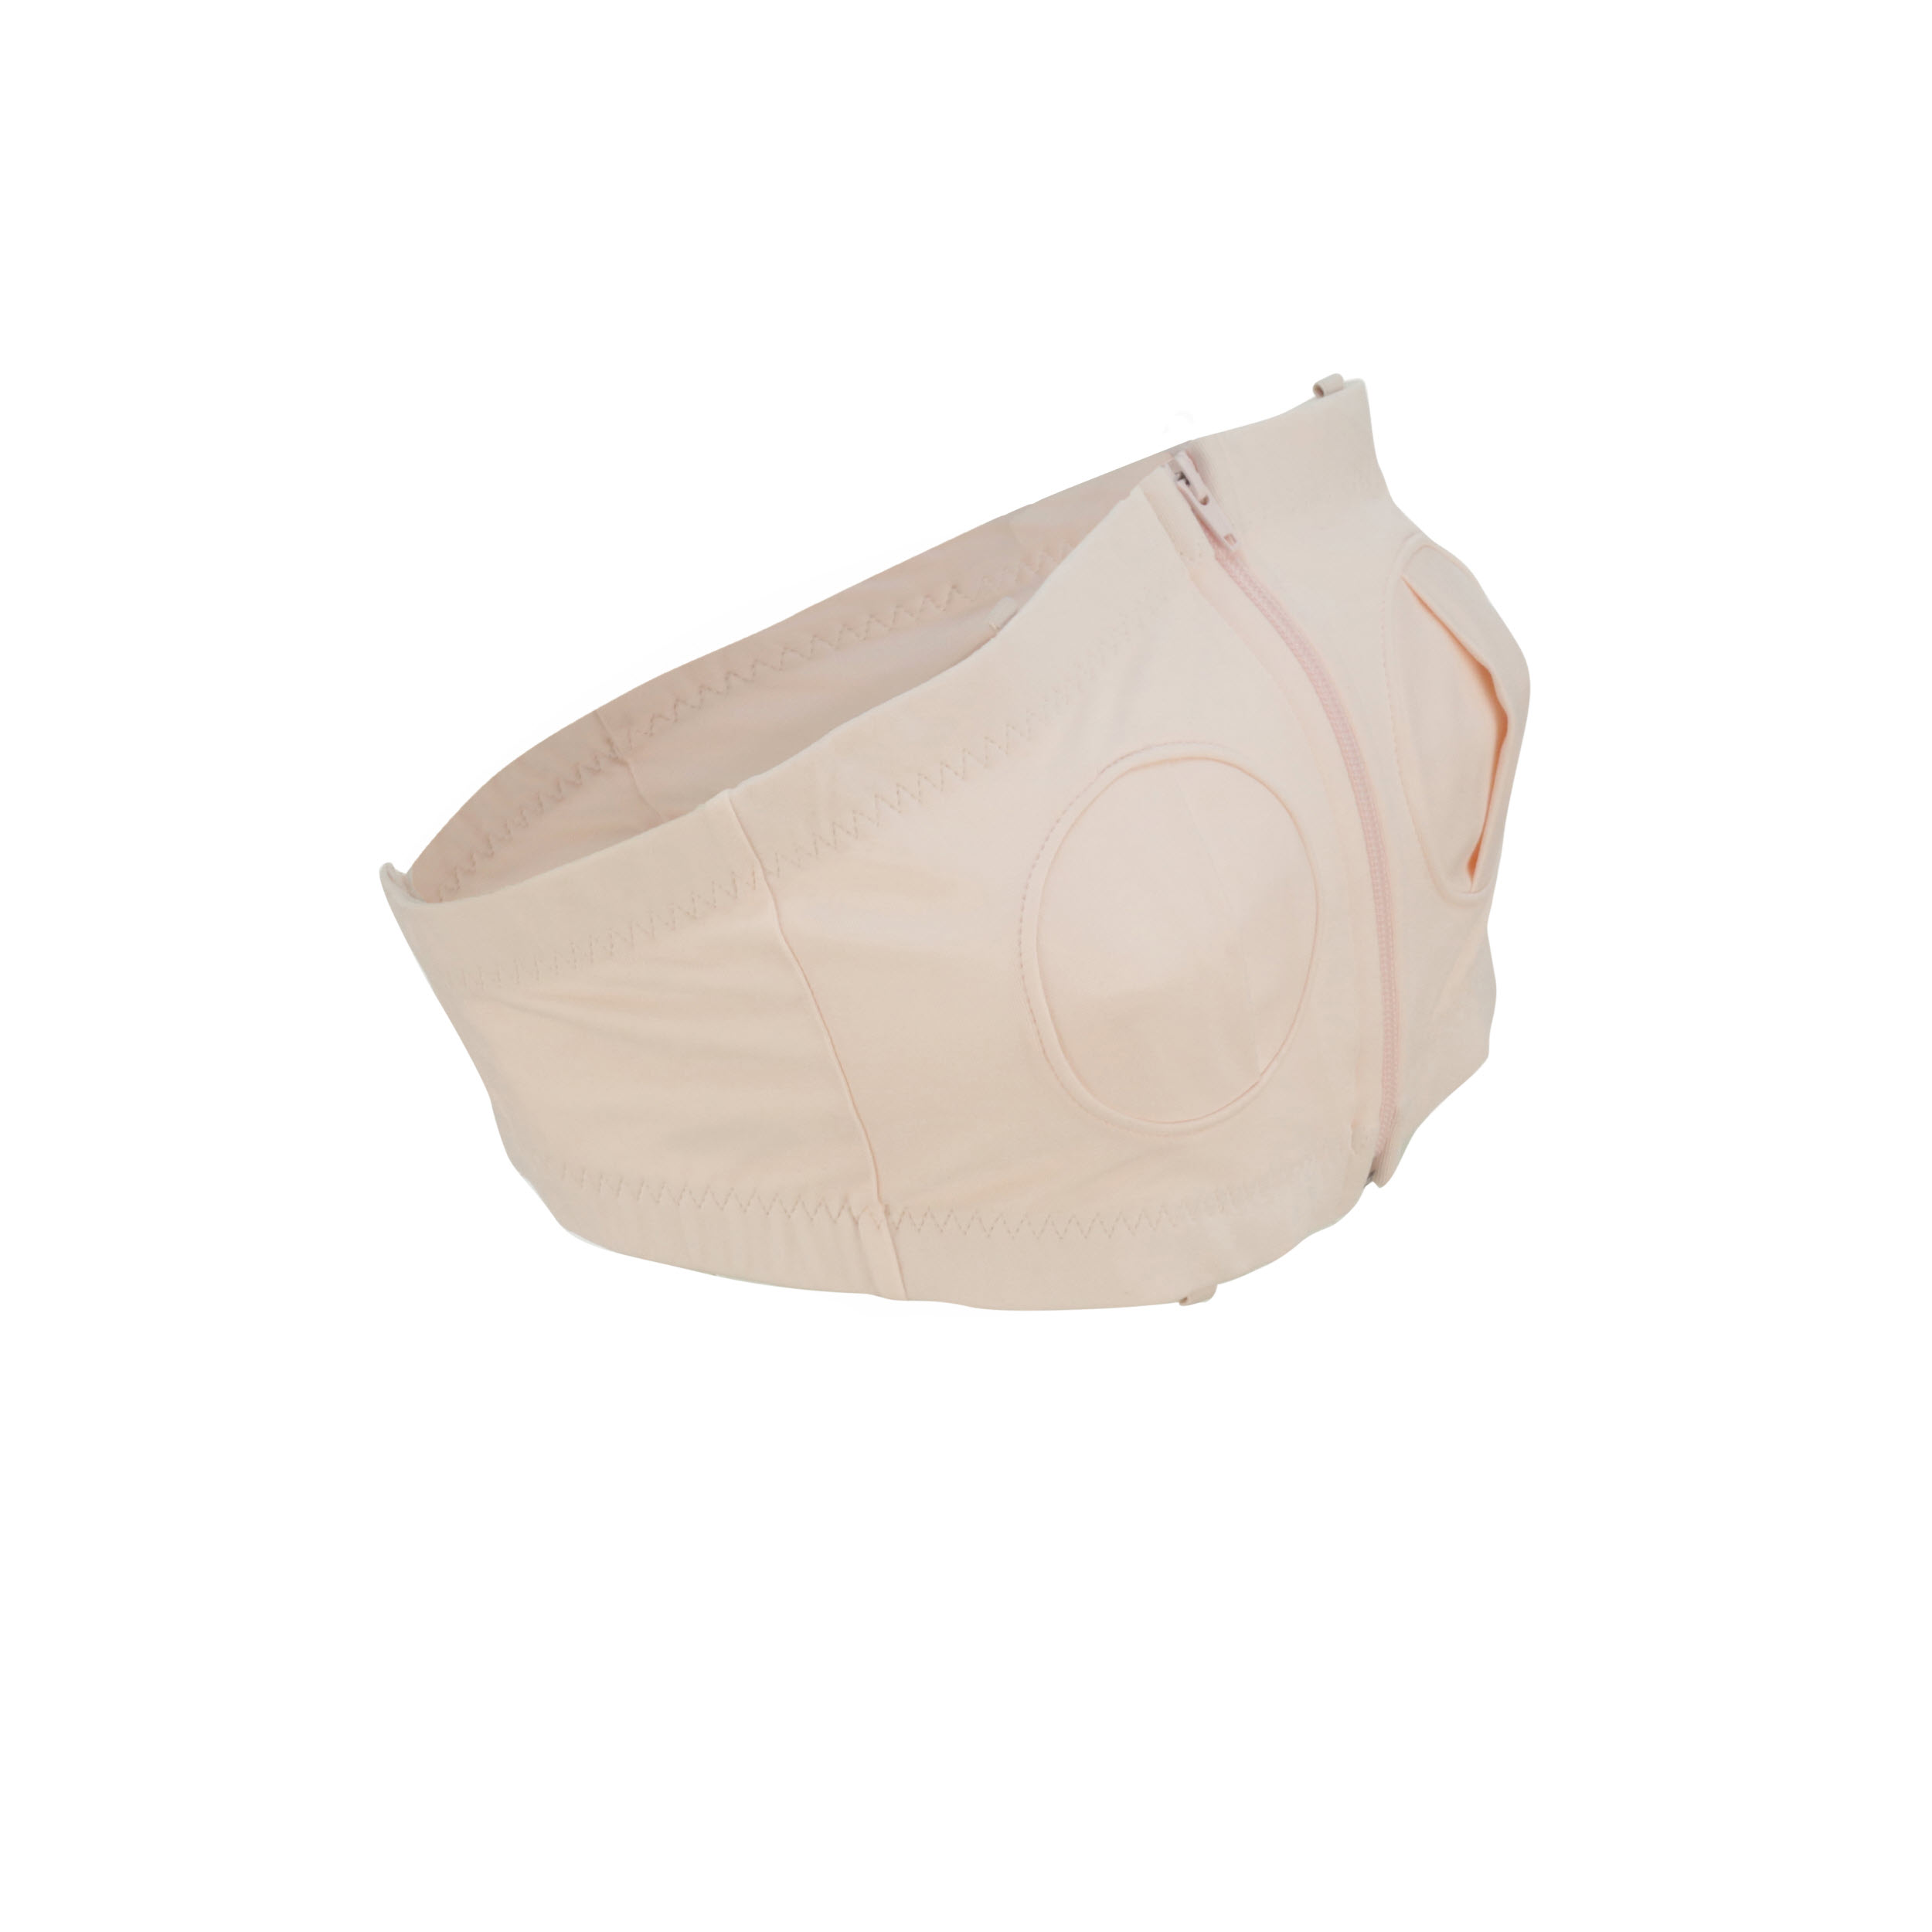 Lansinoh Simple Wishes Hands Free Adhesive Strapless Backless Breast Pump  Bustier with Adjustable Sizing XS-L 1 ct